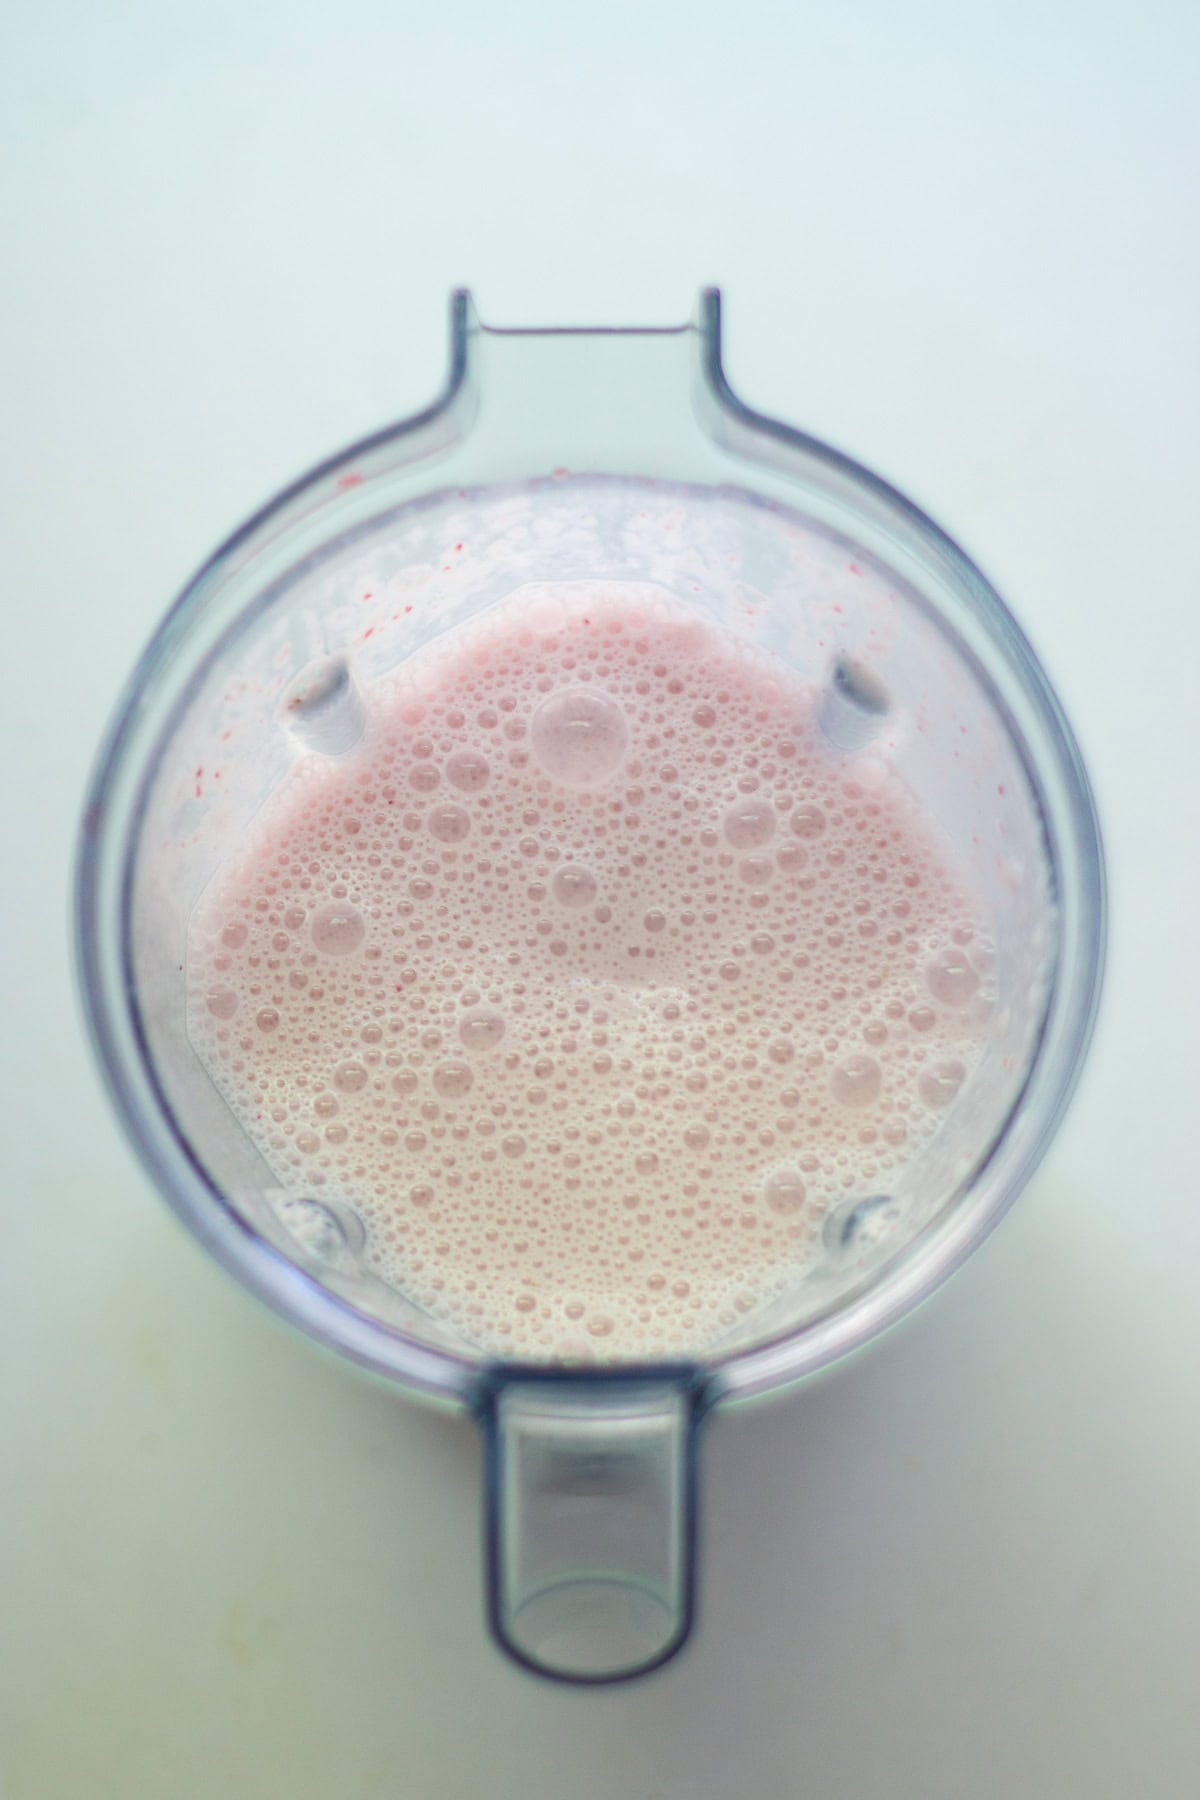 Strawberries and milk blended.